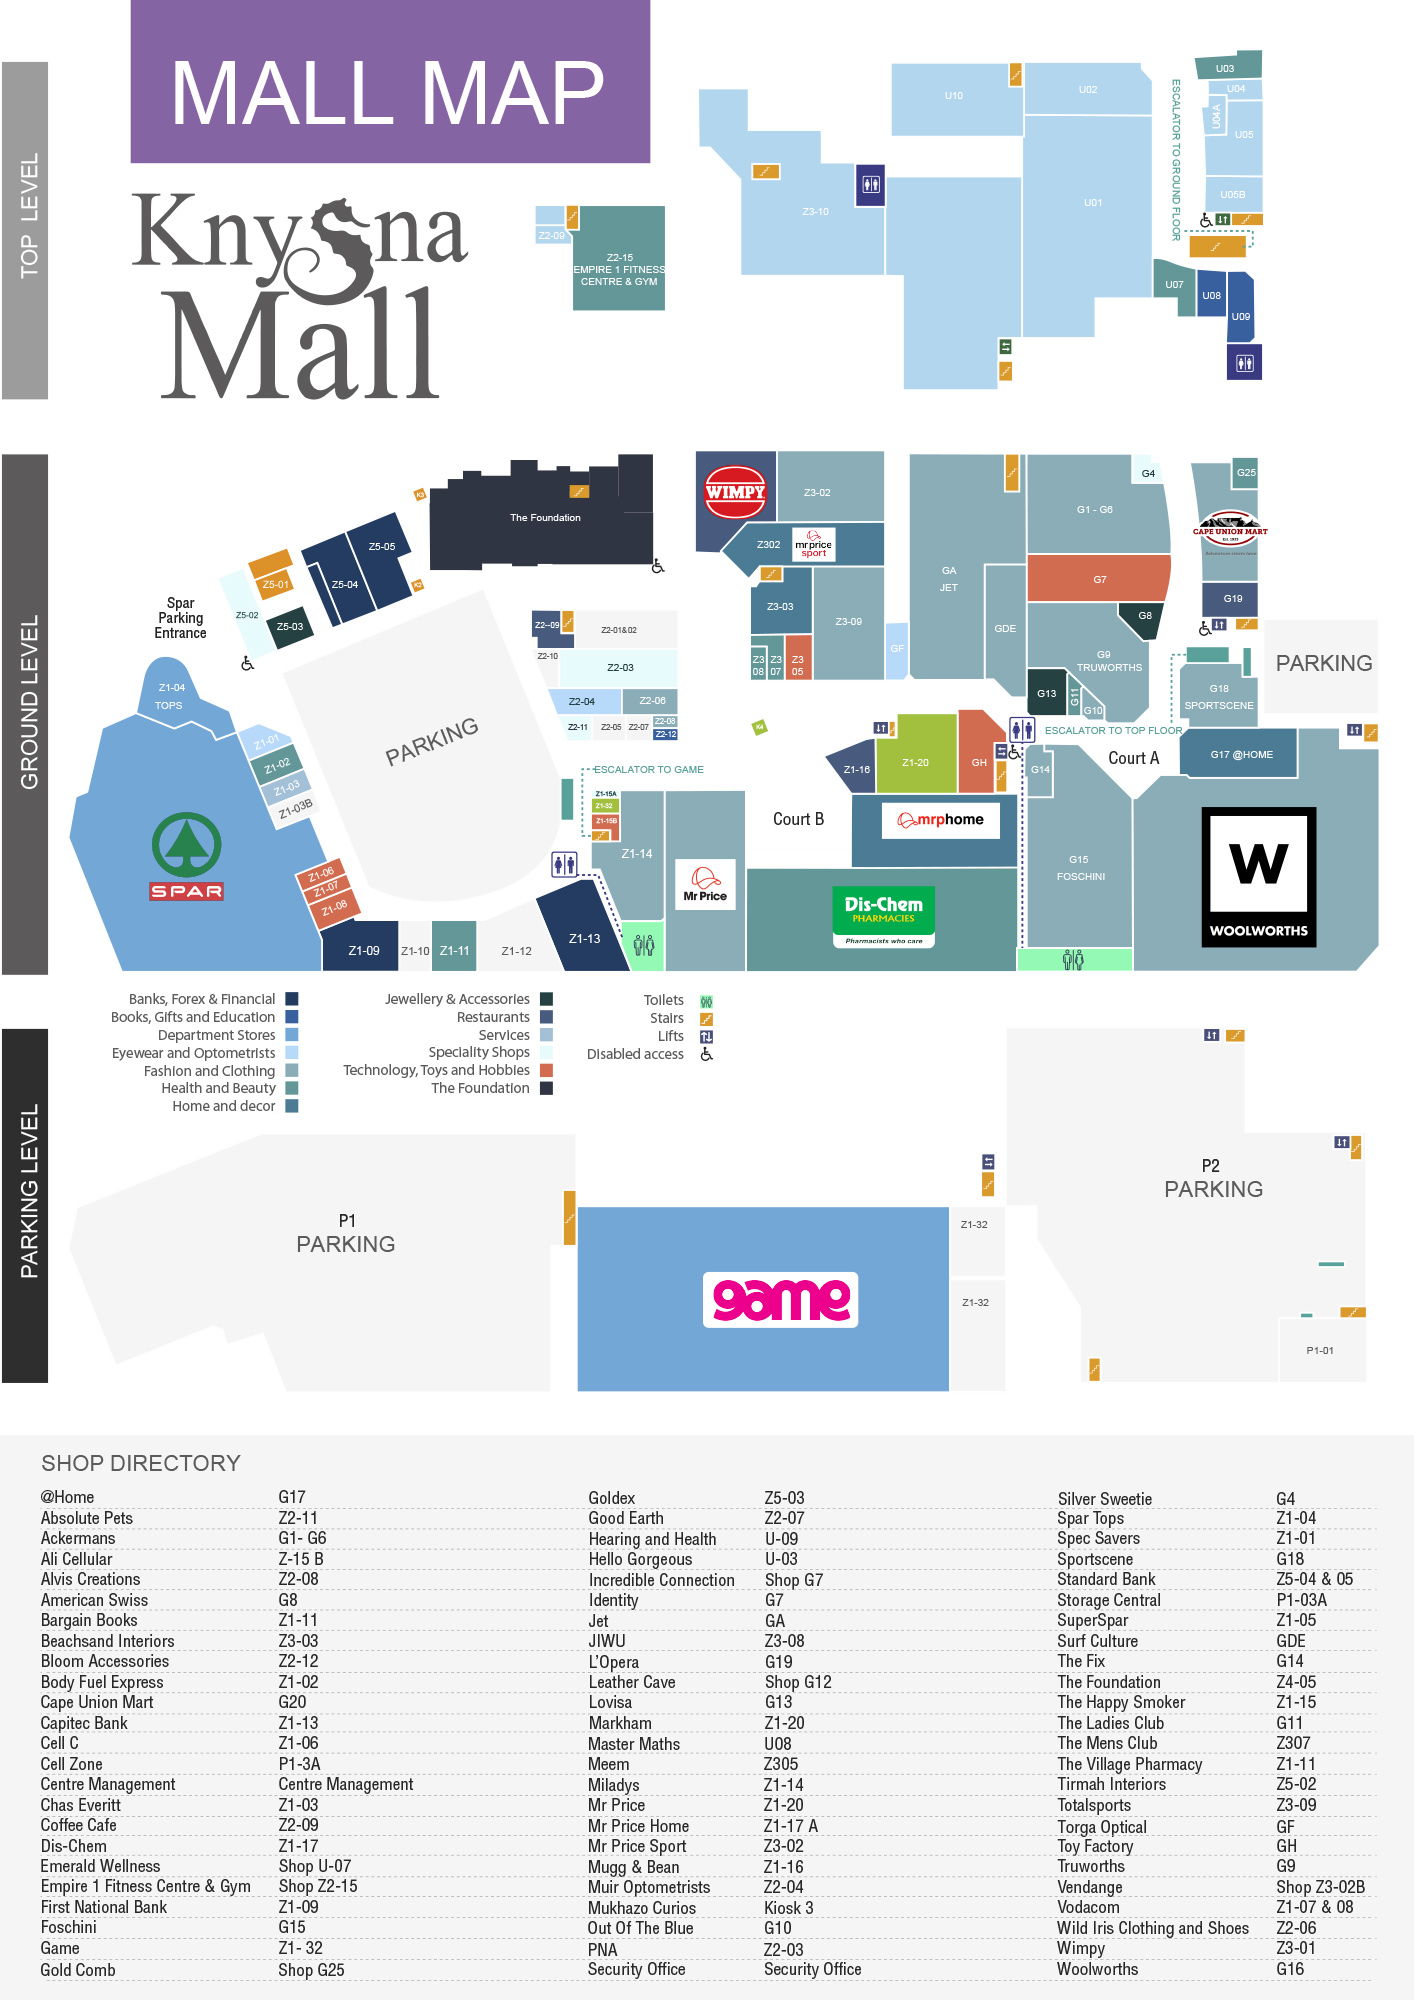 MALL MAP MAY 2020 CHARLENE.cdr